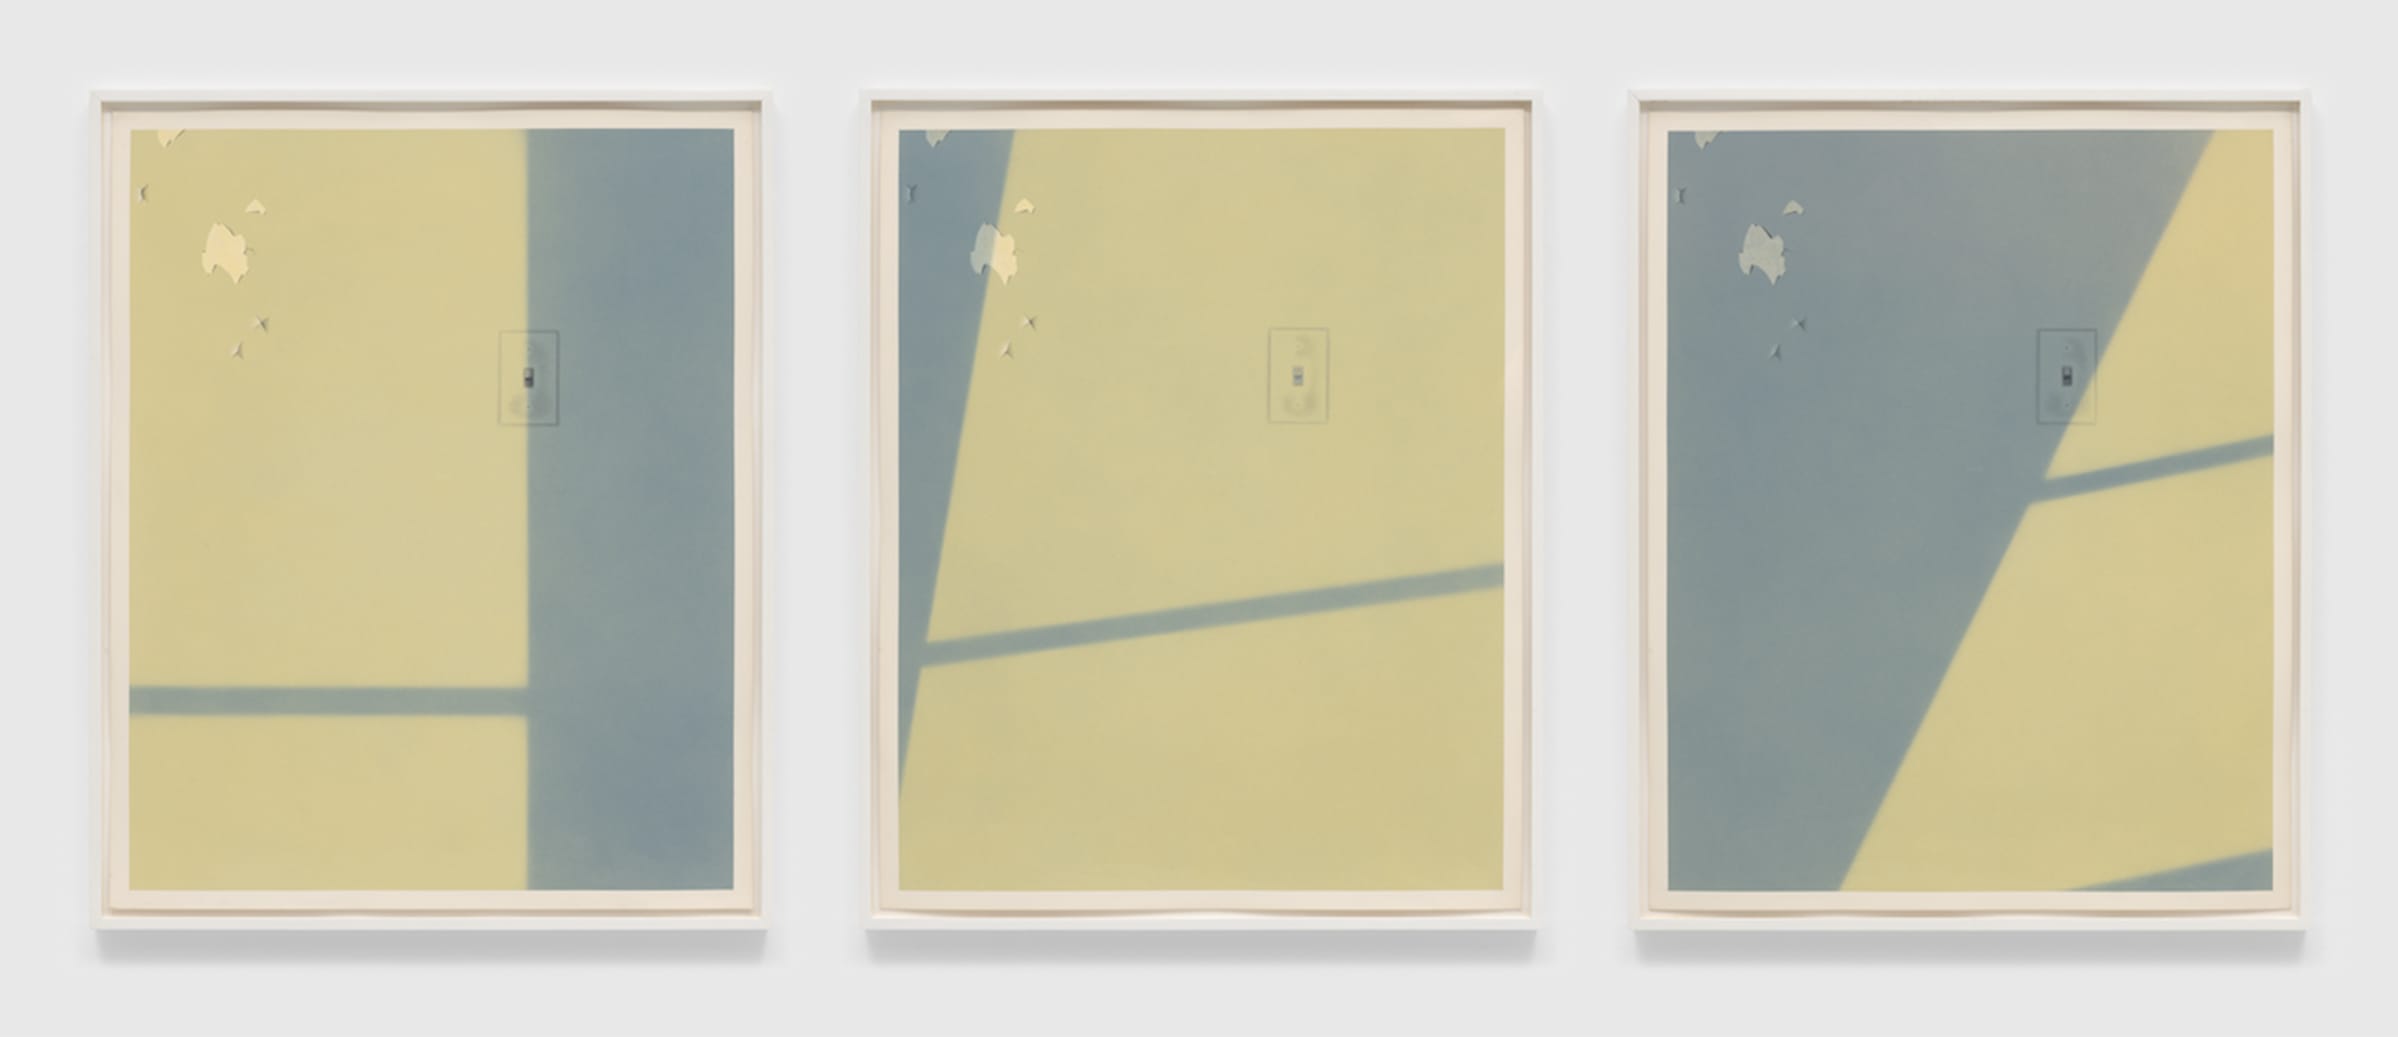 Ching Ho Cheng, Untitled, Window Triptych, 1982. Los Angeles Museum of Art. 